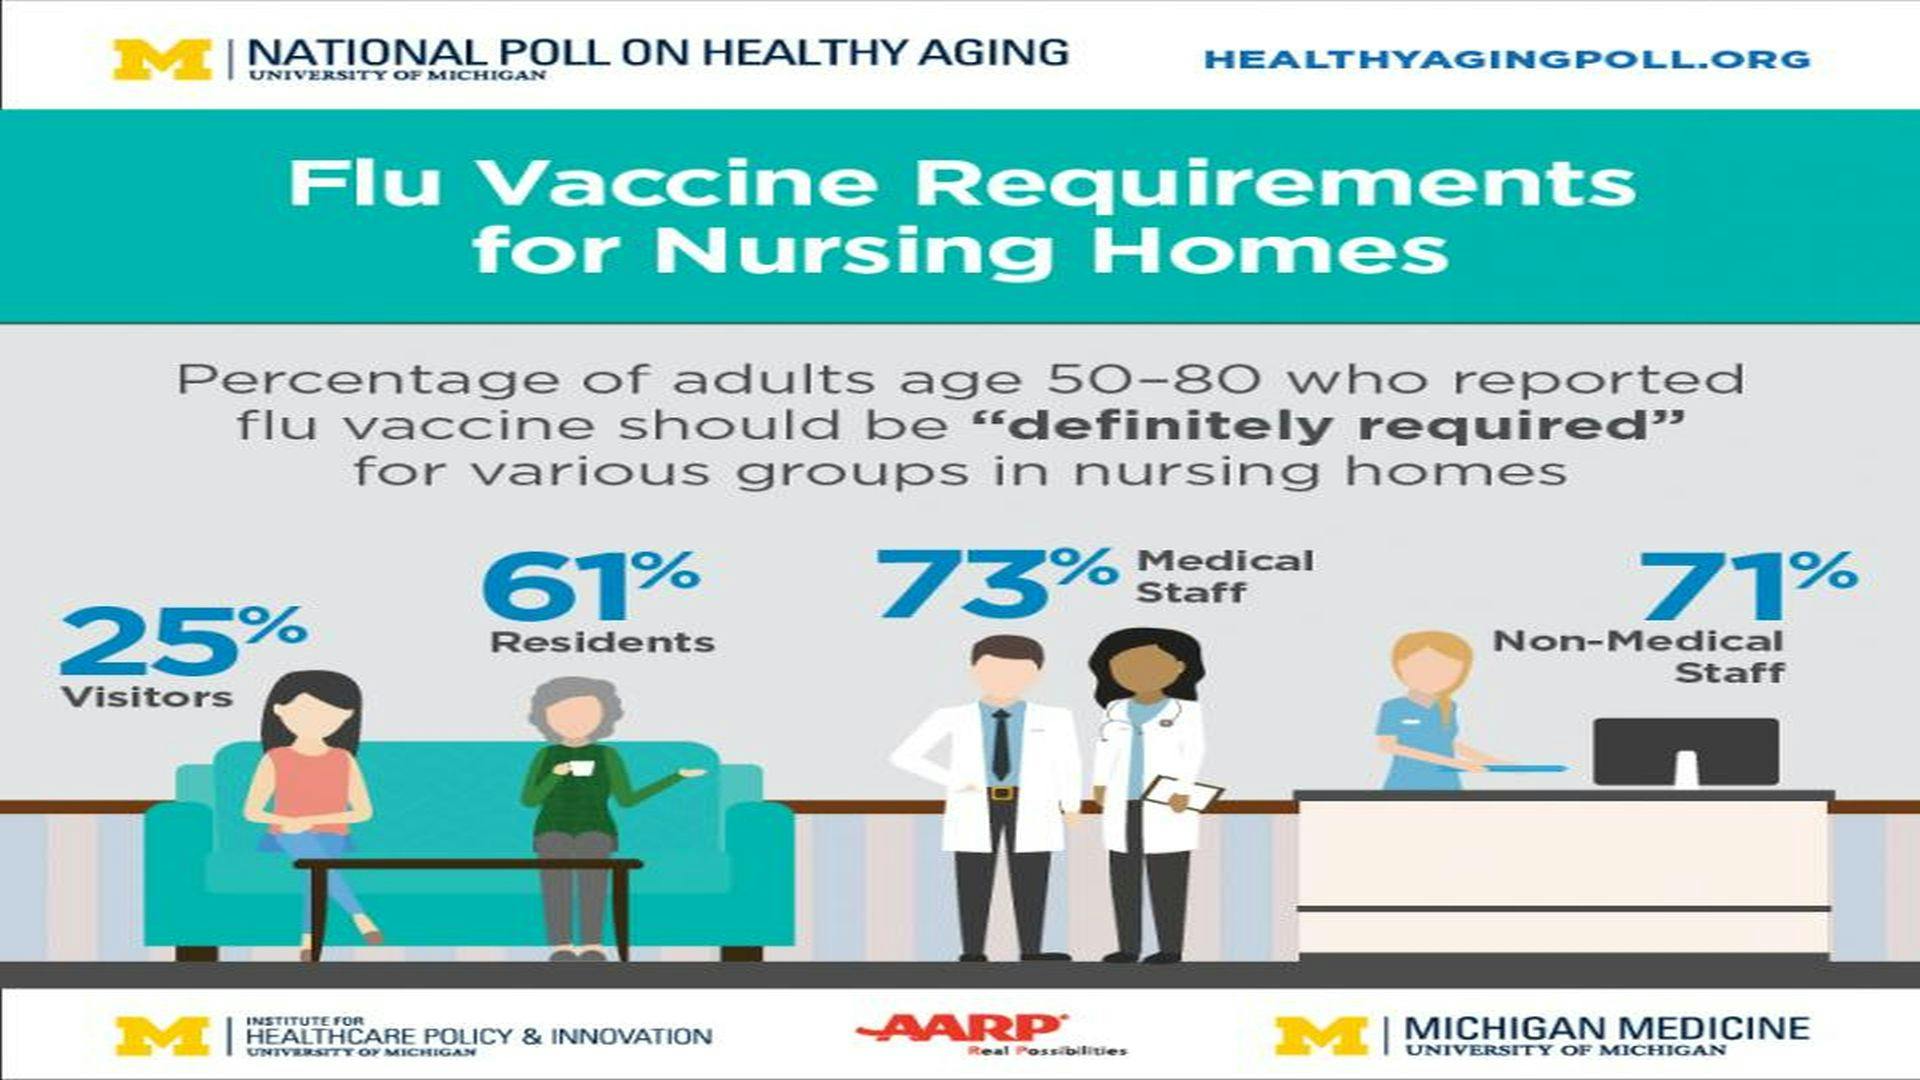 Nursing Homes Should Require Flu Shots for All Staff and Patients, Poll Indicates